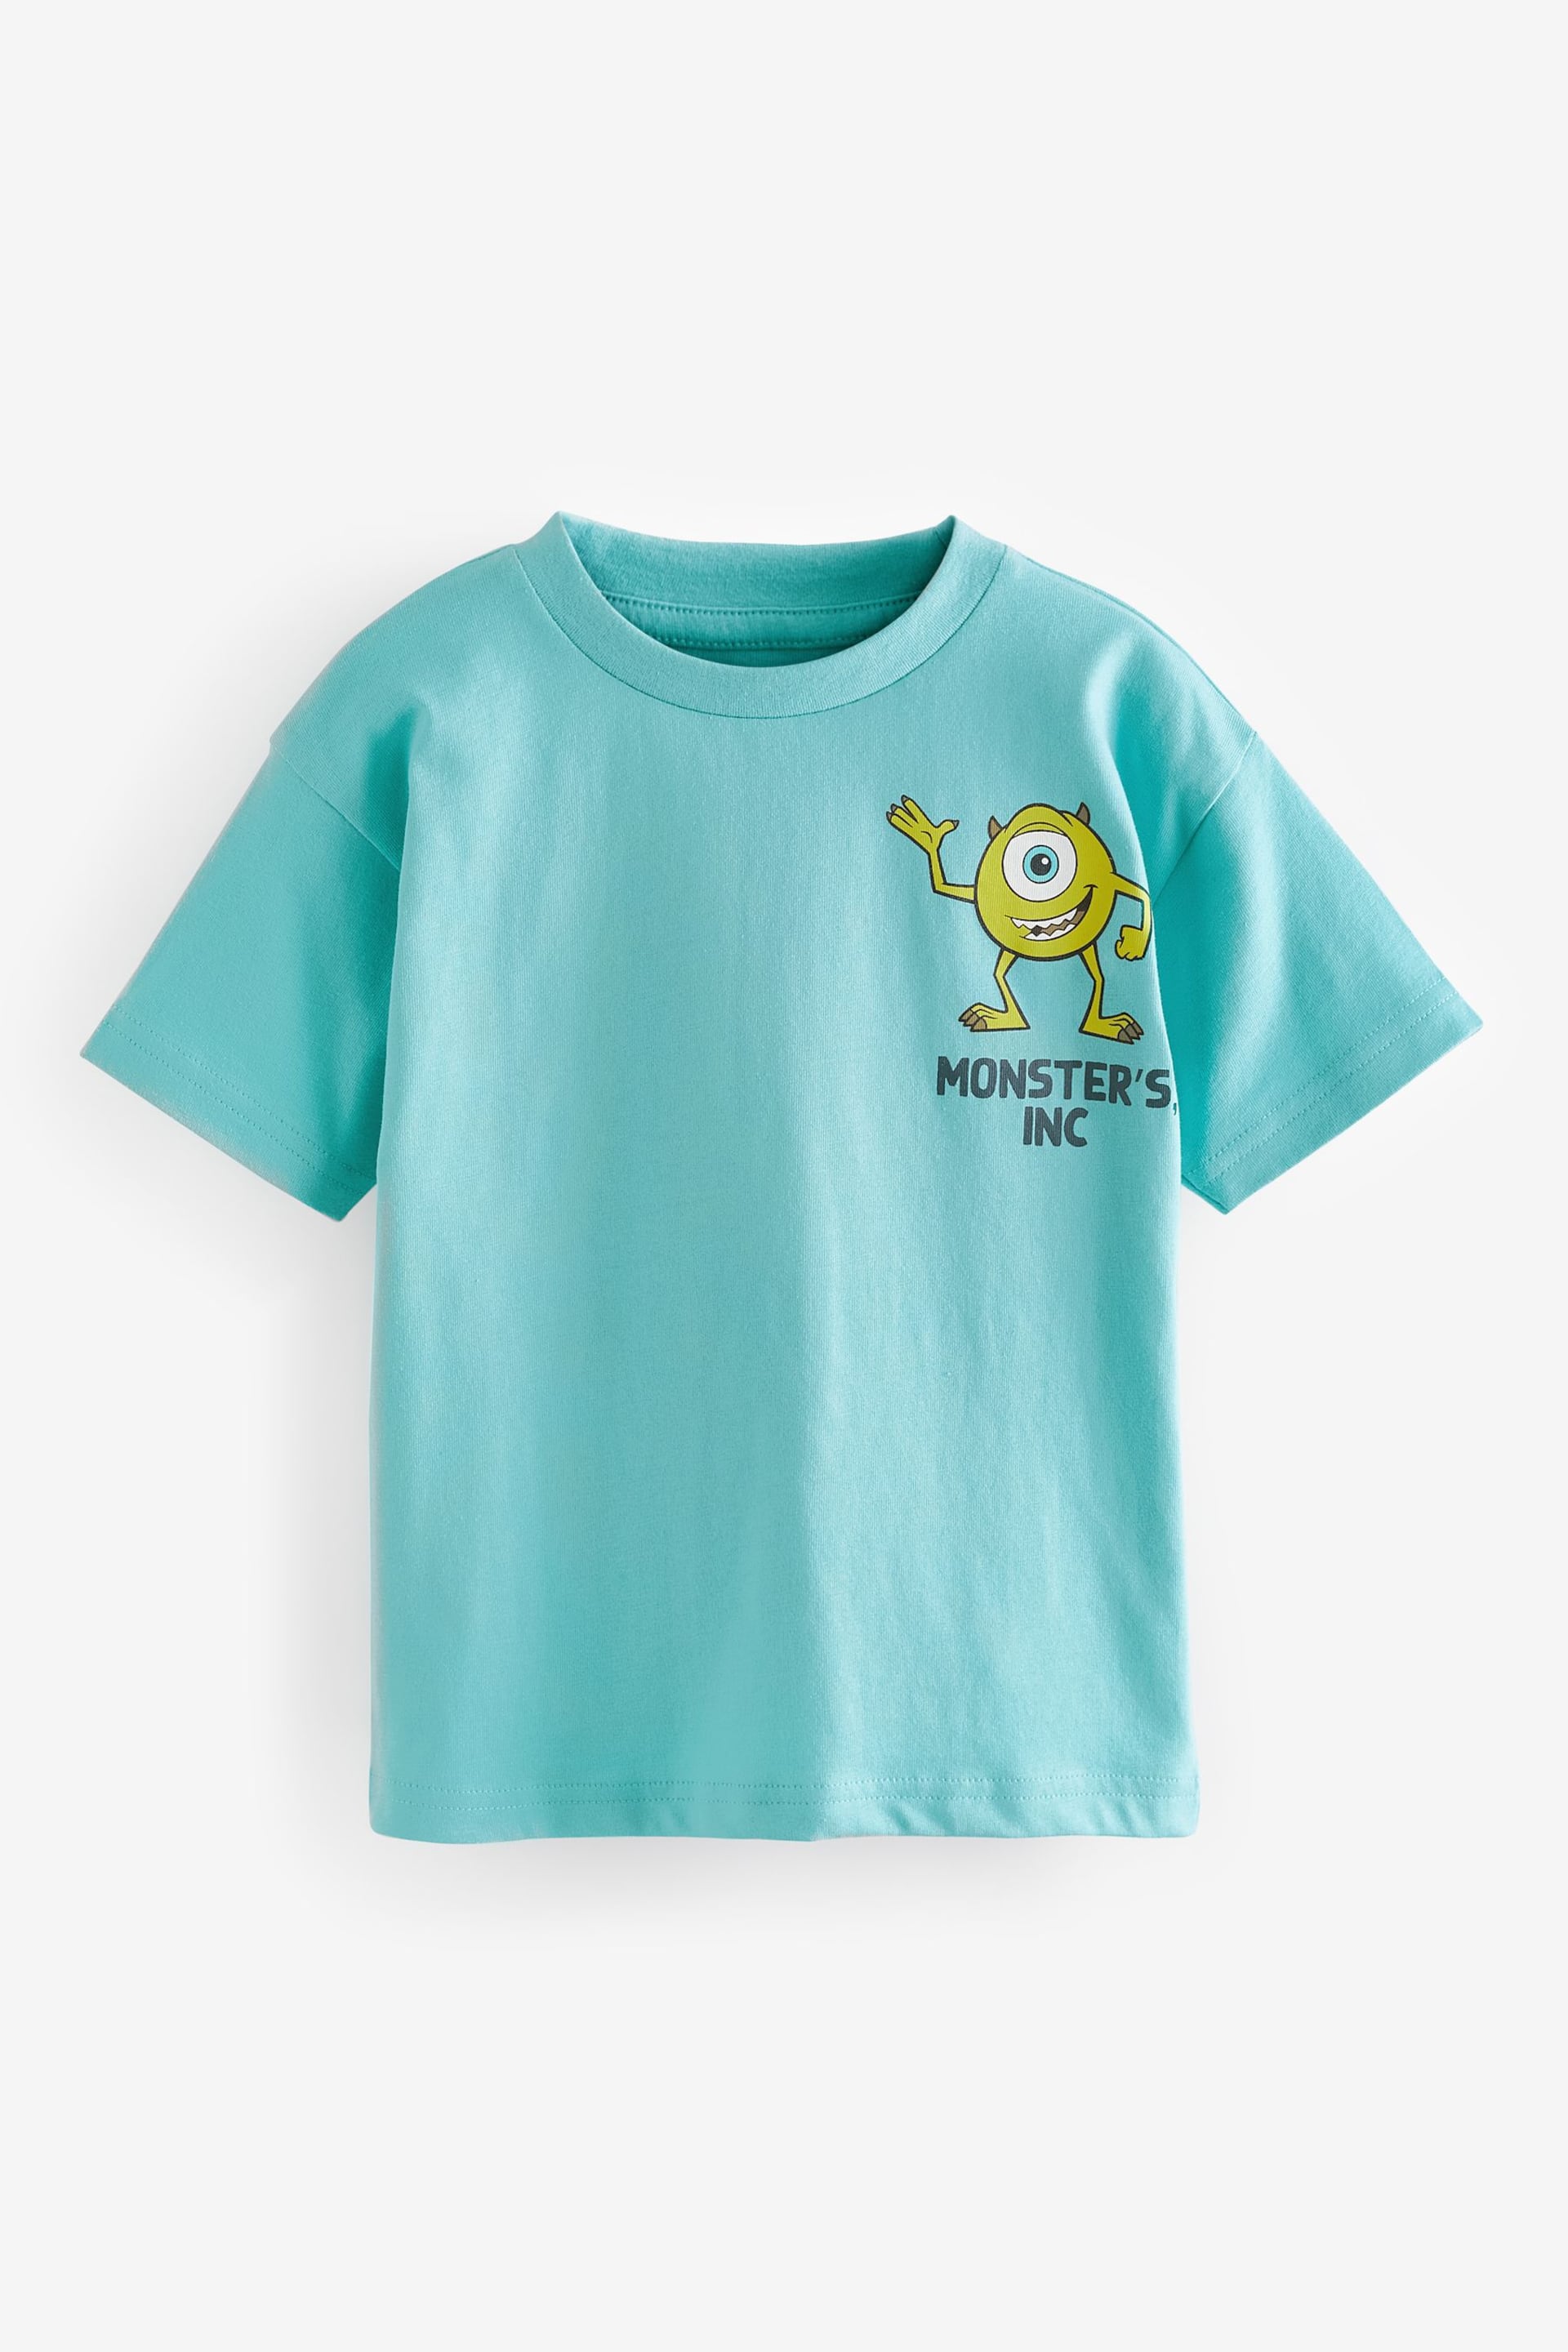 Blue Monsters Inc Short Sleeve T-Shirt (3mths-8yrs) - Image 1 of 3